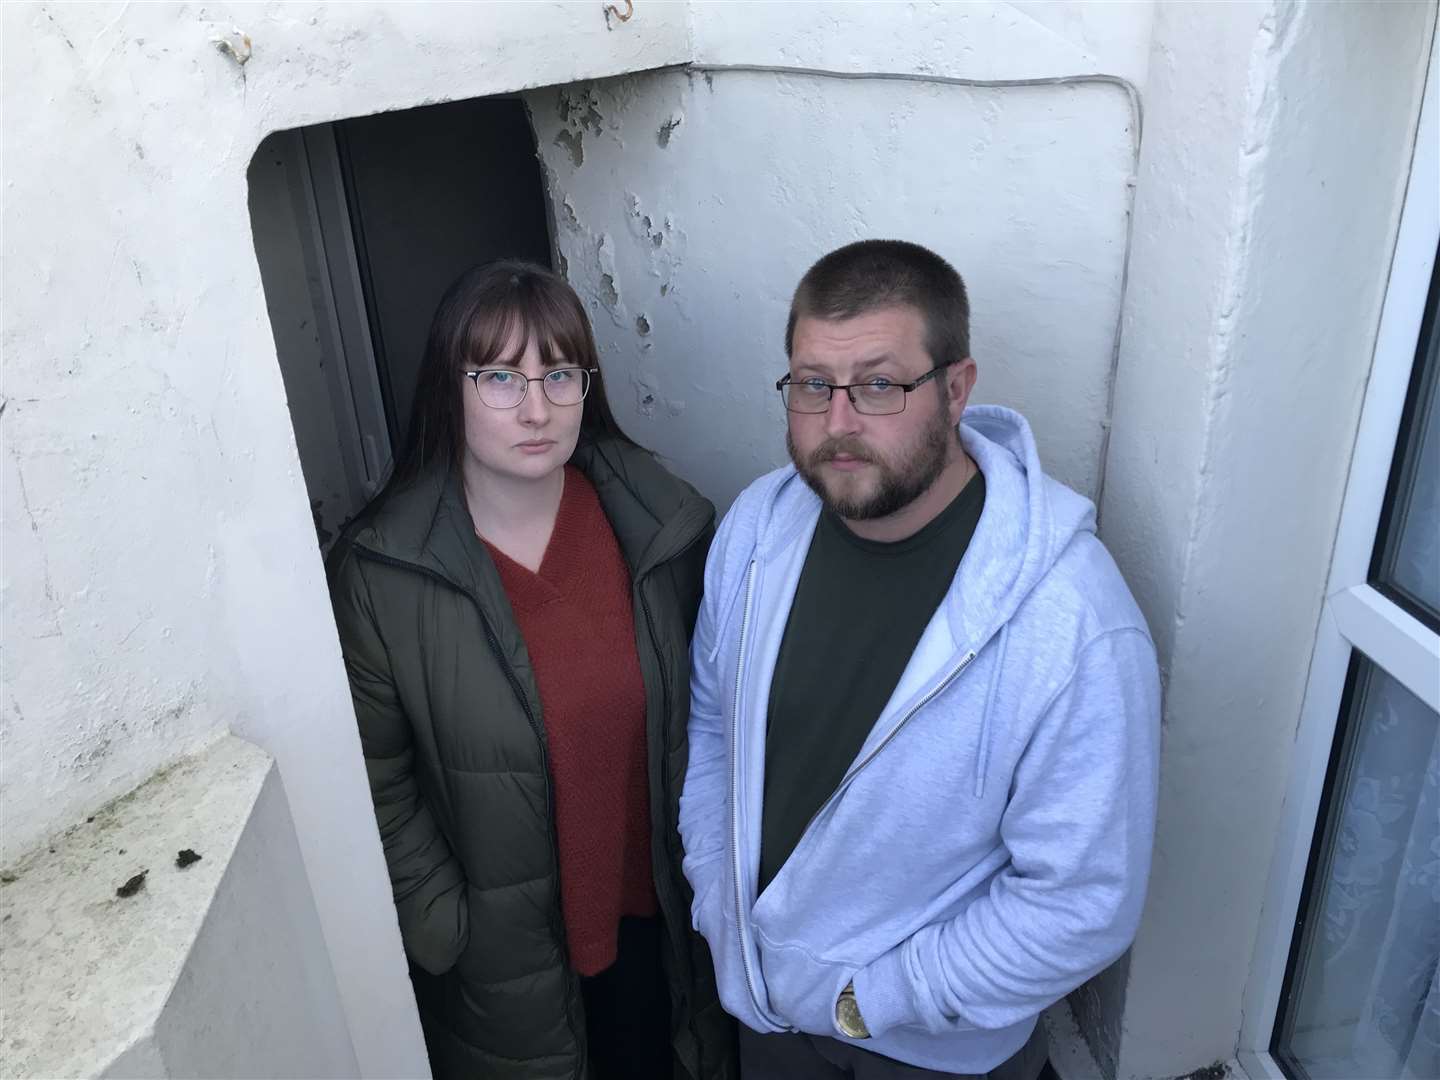 Frances Spanner and Tony King have been left feeling 'hopeless' after flooding gutted their home a second time in two years